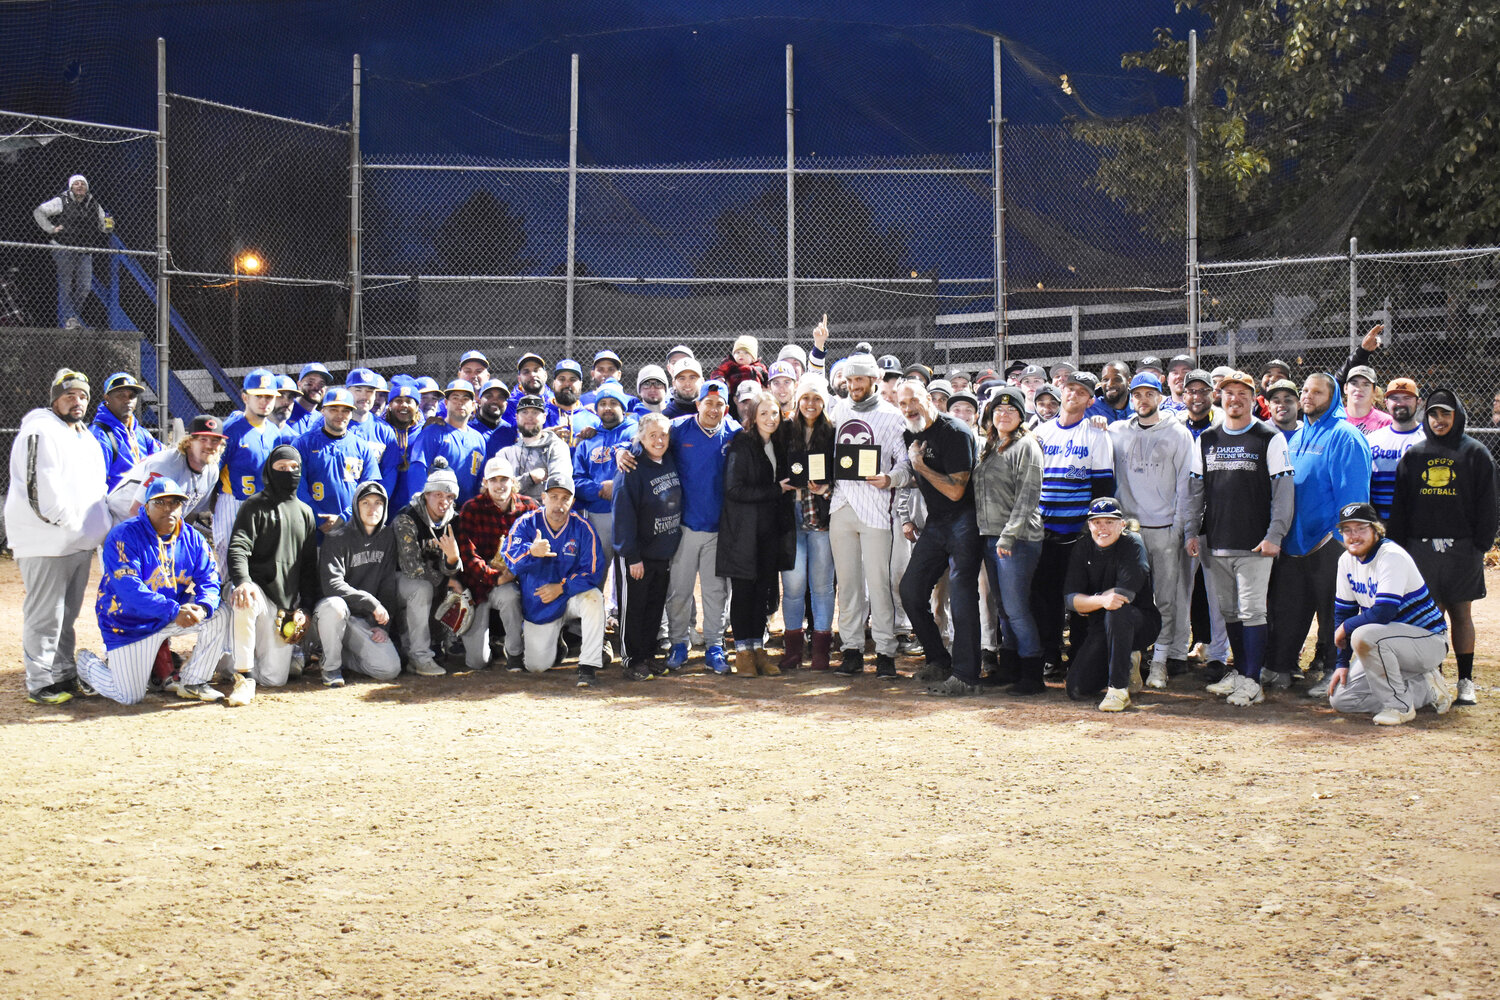 Players and tournament organizers gathered at home plate between games for a group photo and to present the Mills Family with a plaque in honor of Timmy Mills.